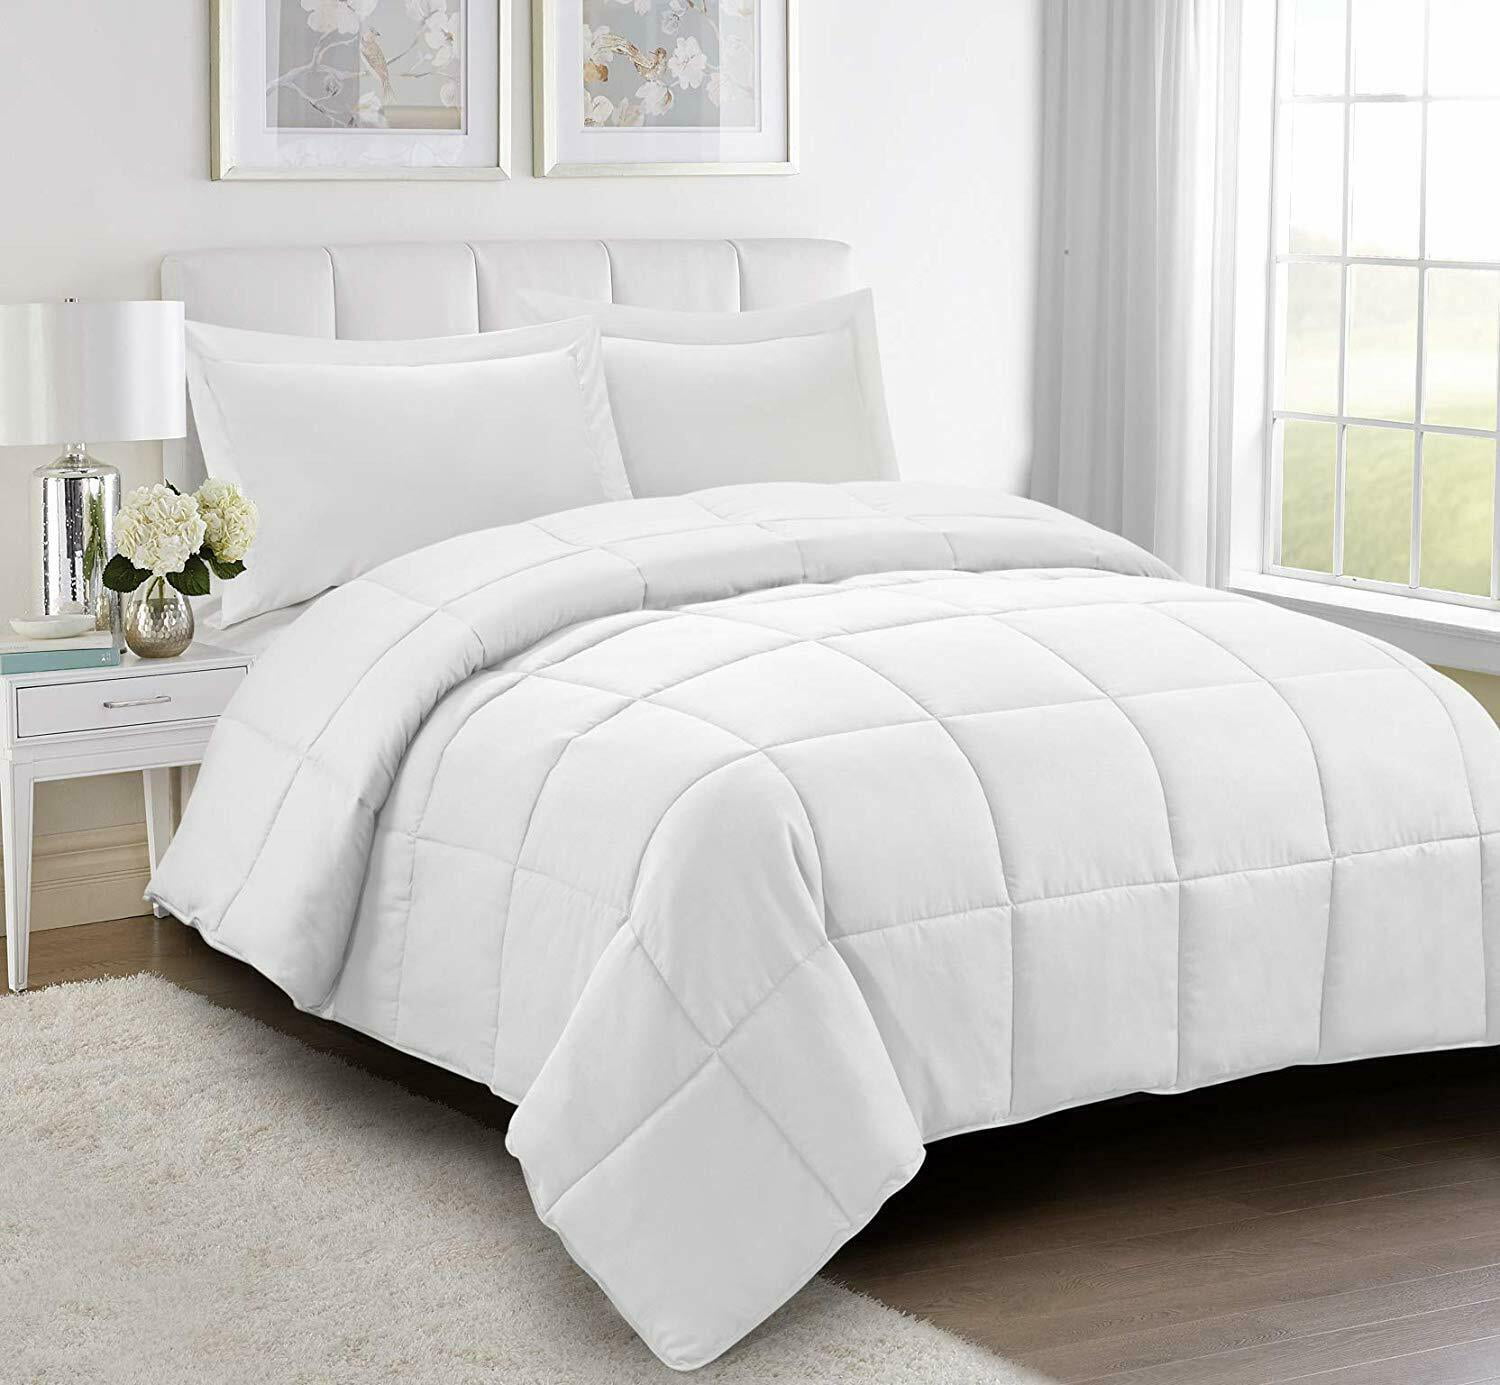 Details about   HIG All Season Reversible Down Alternative Comforter Set 3 Pieces with Shams 